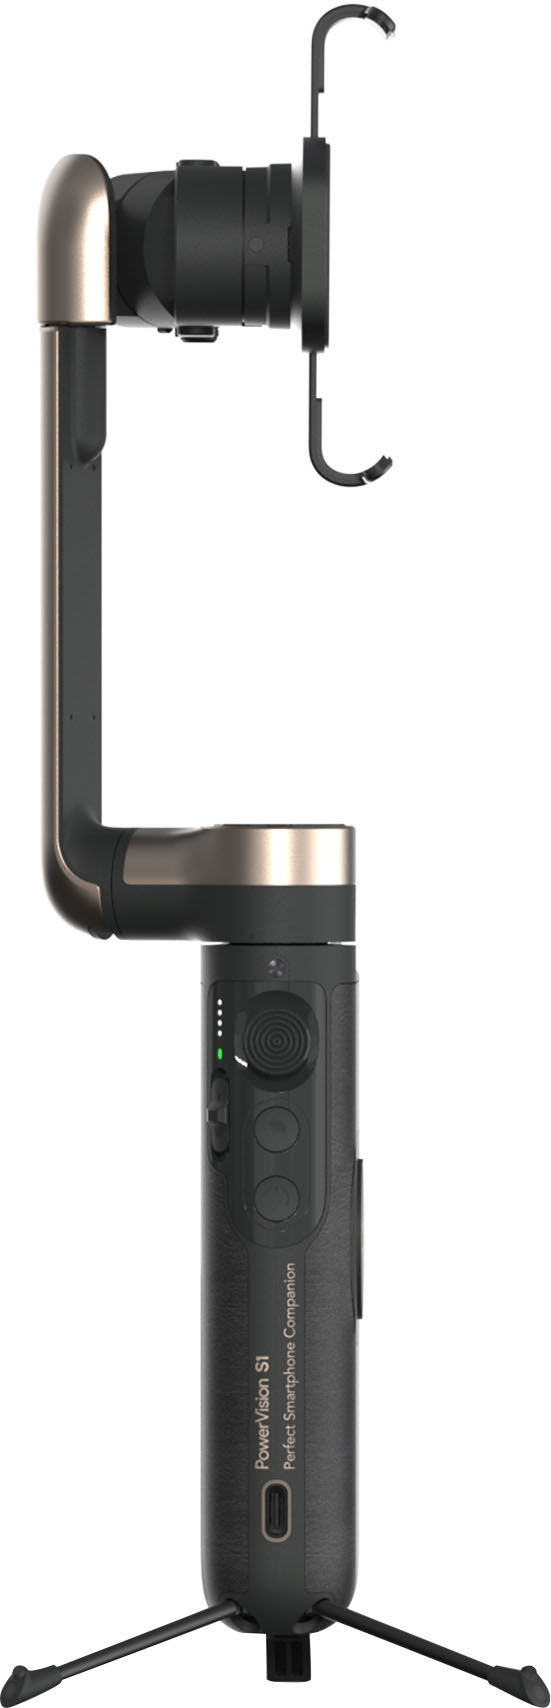 Left View: PowerVision - S1 Smartphone 3-Axis Gimbal Stabilizer - Black